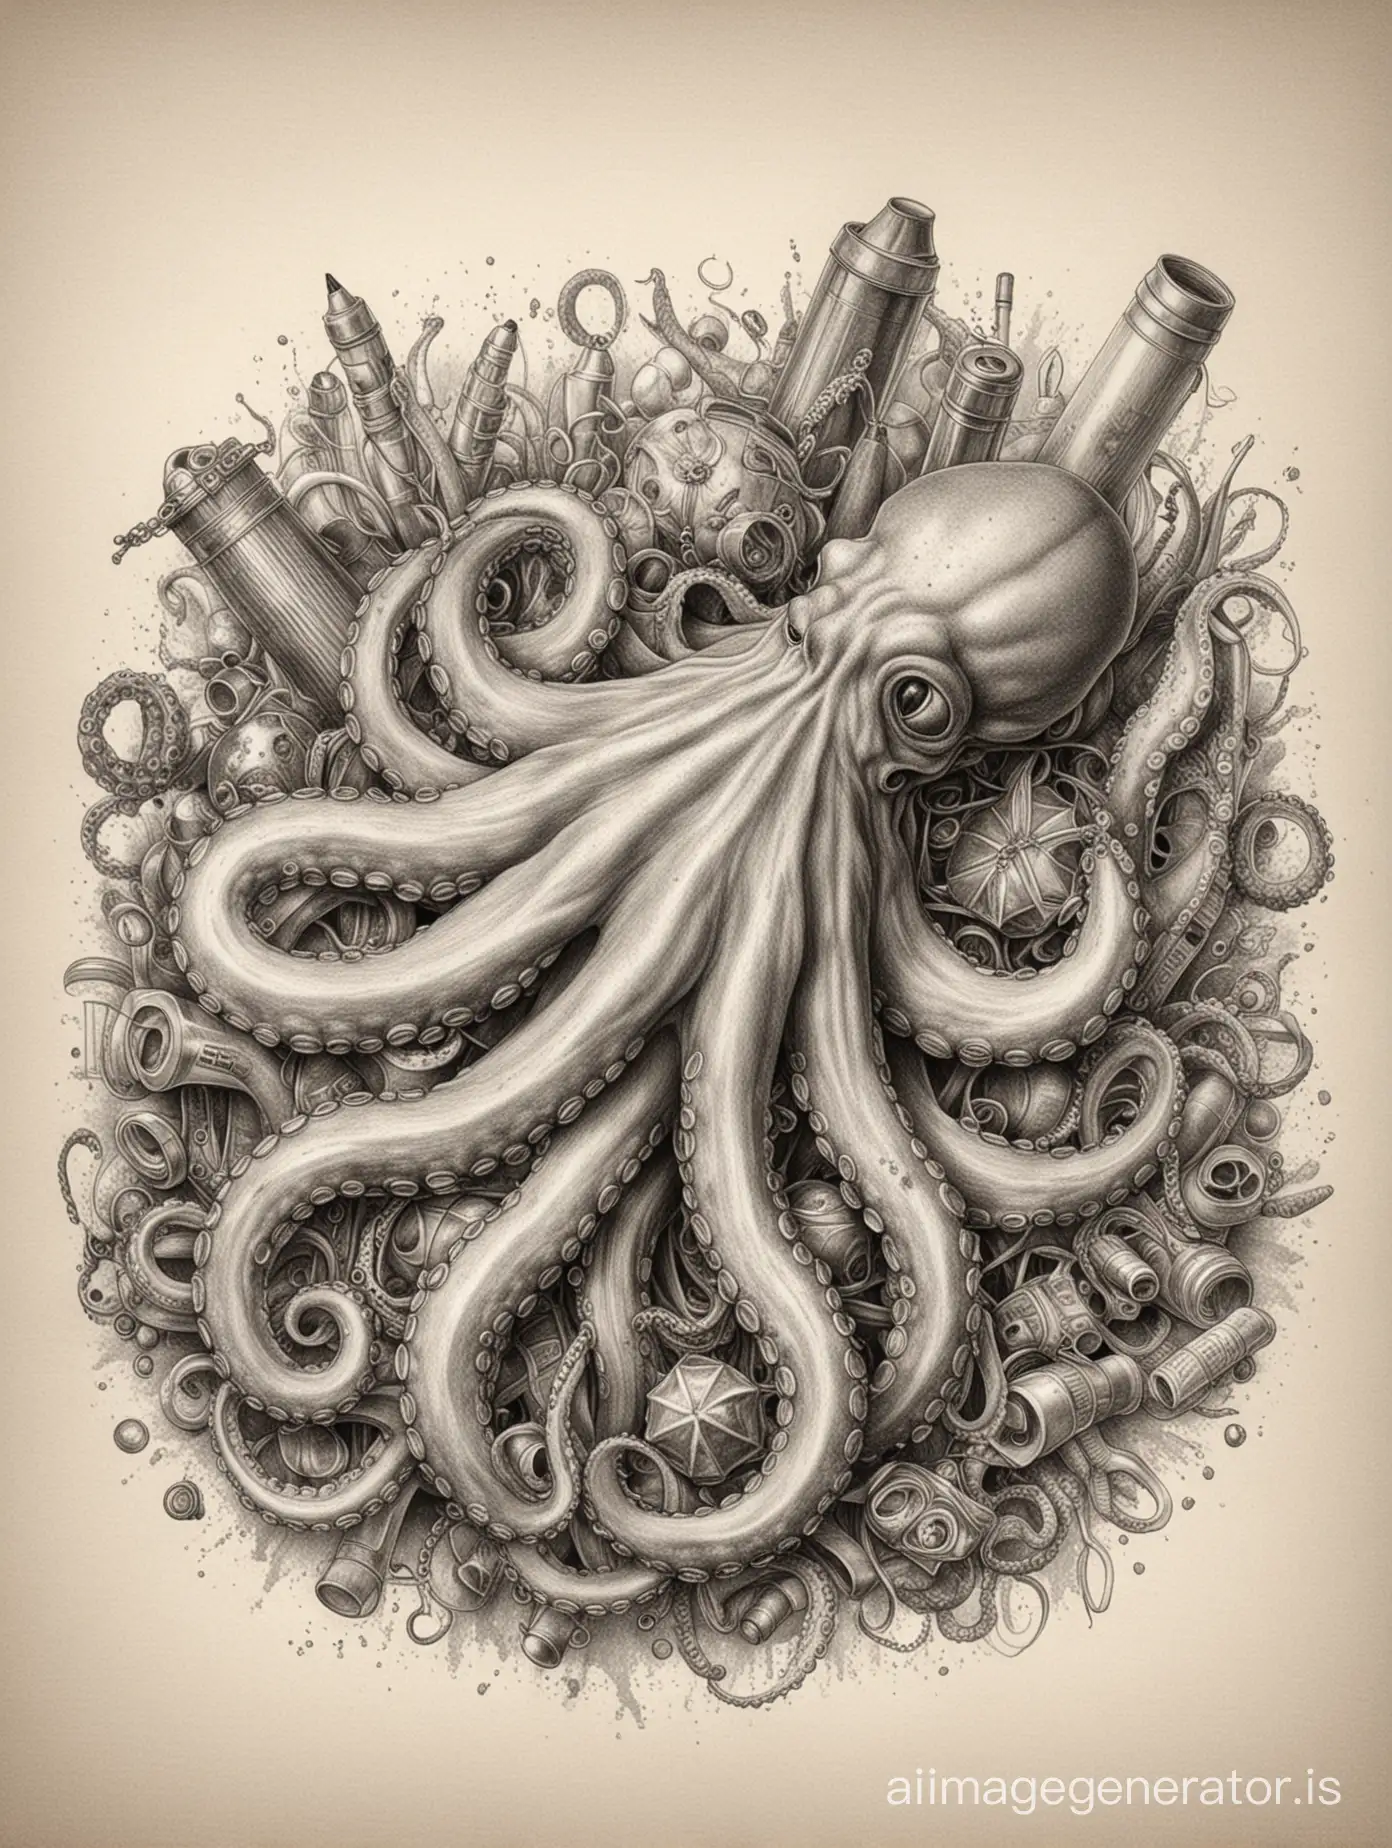 Ultra-Realistic-Pencil-Sketch-of-an-Octopus-Entwined-with-Waste-Items